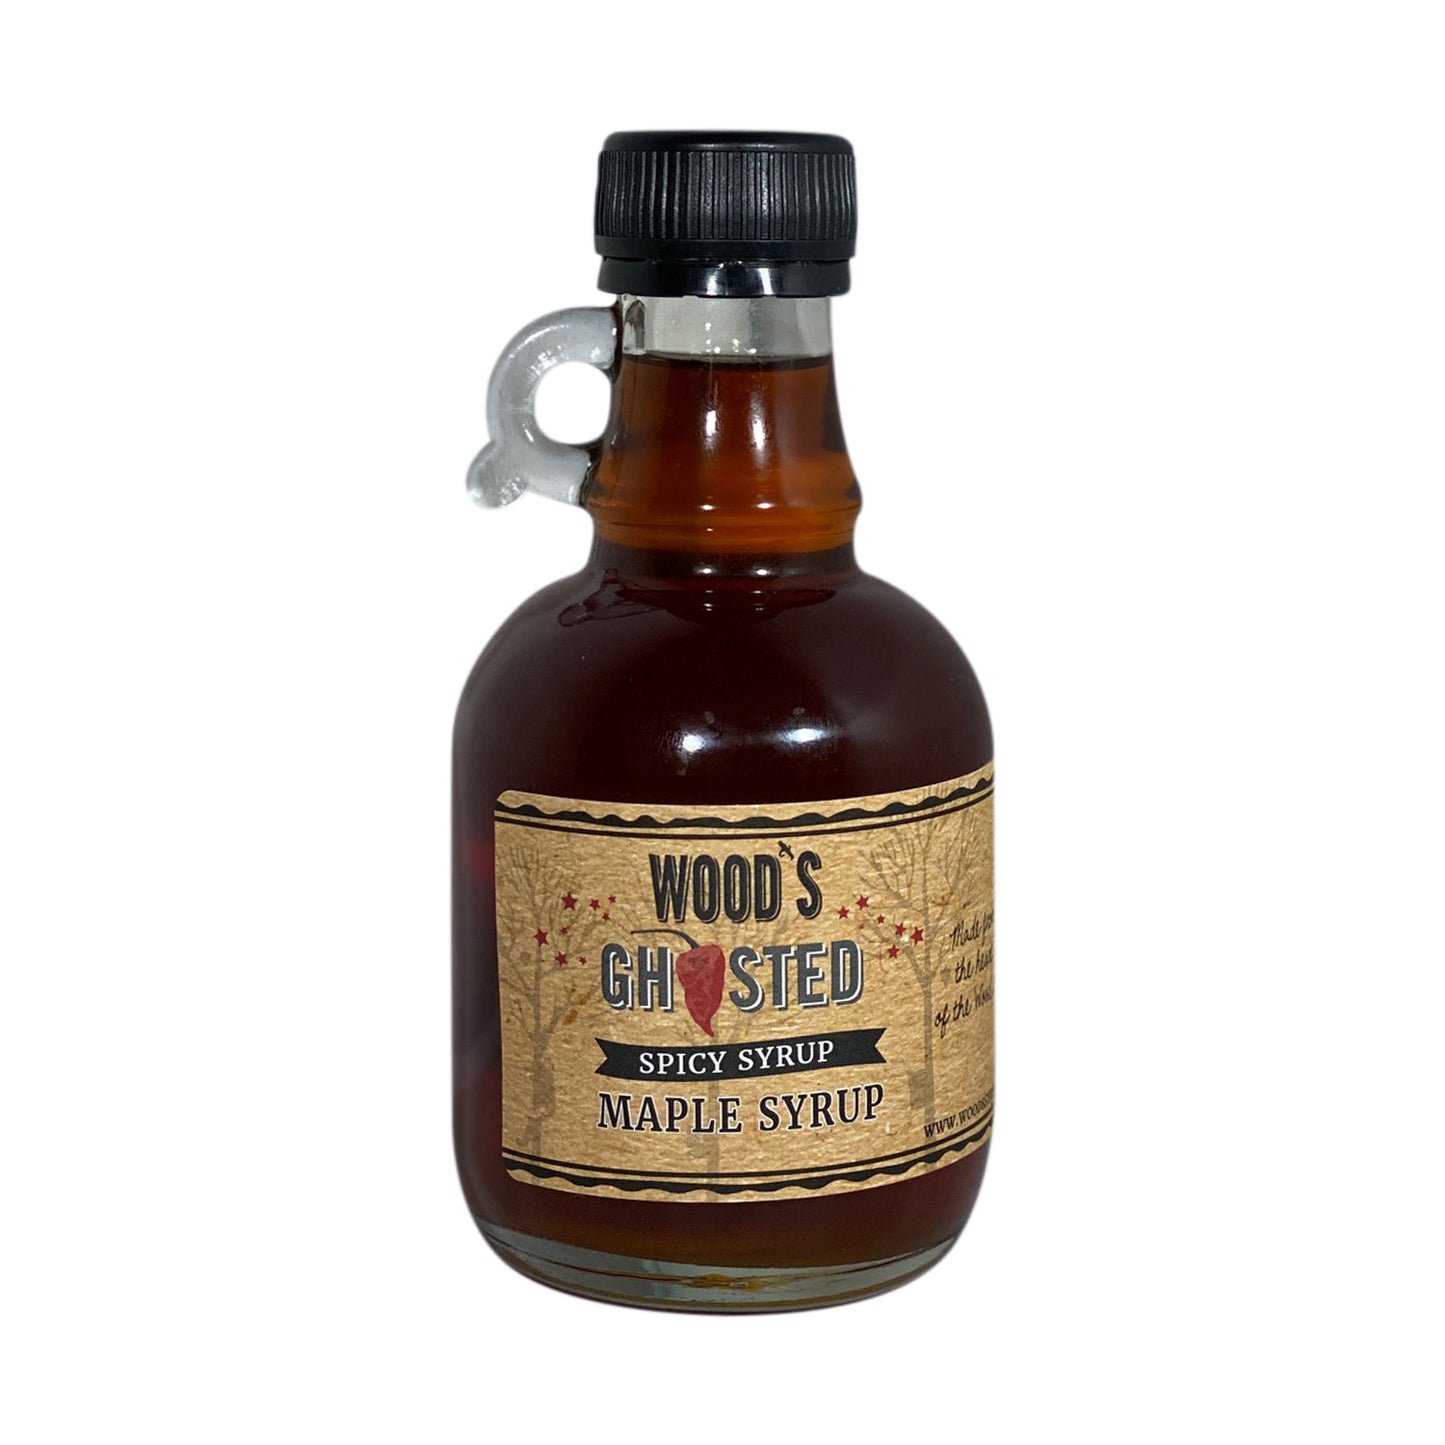 Ghosted Maple Syrup